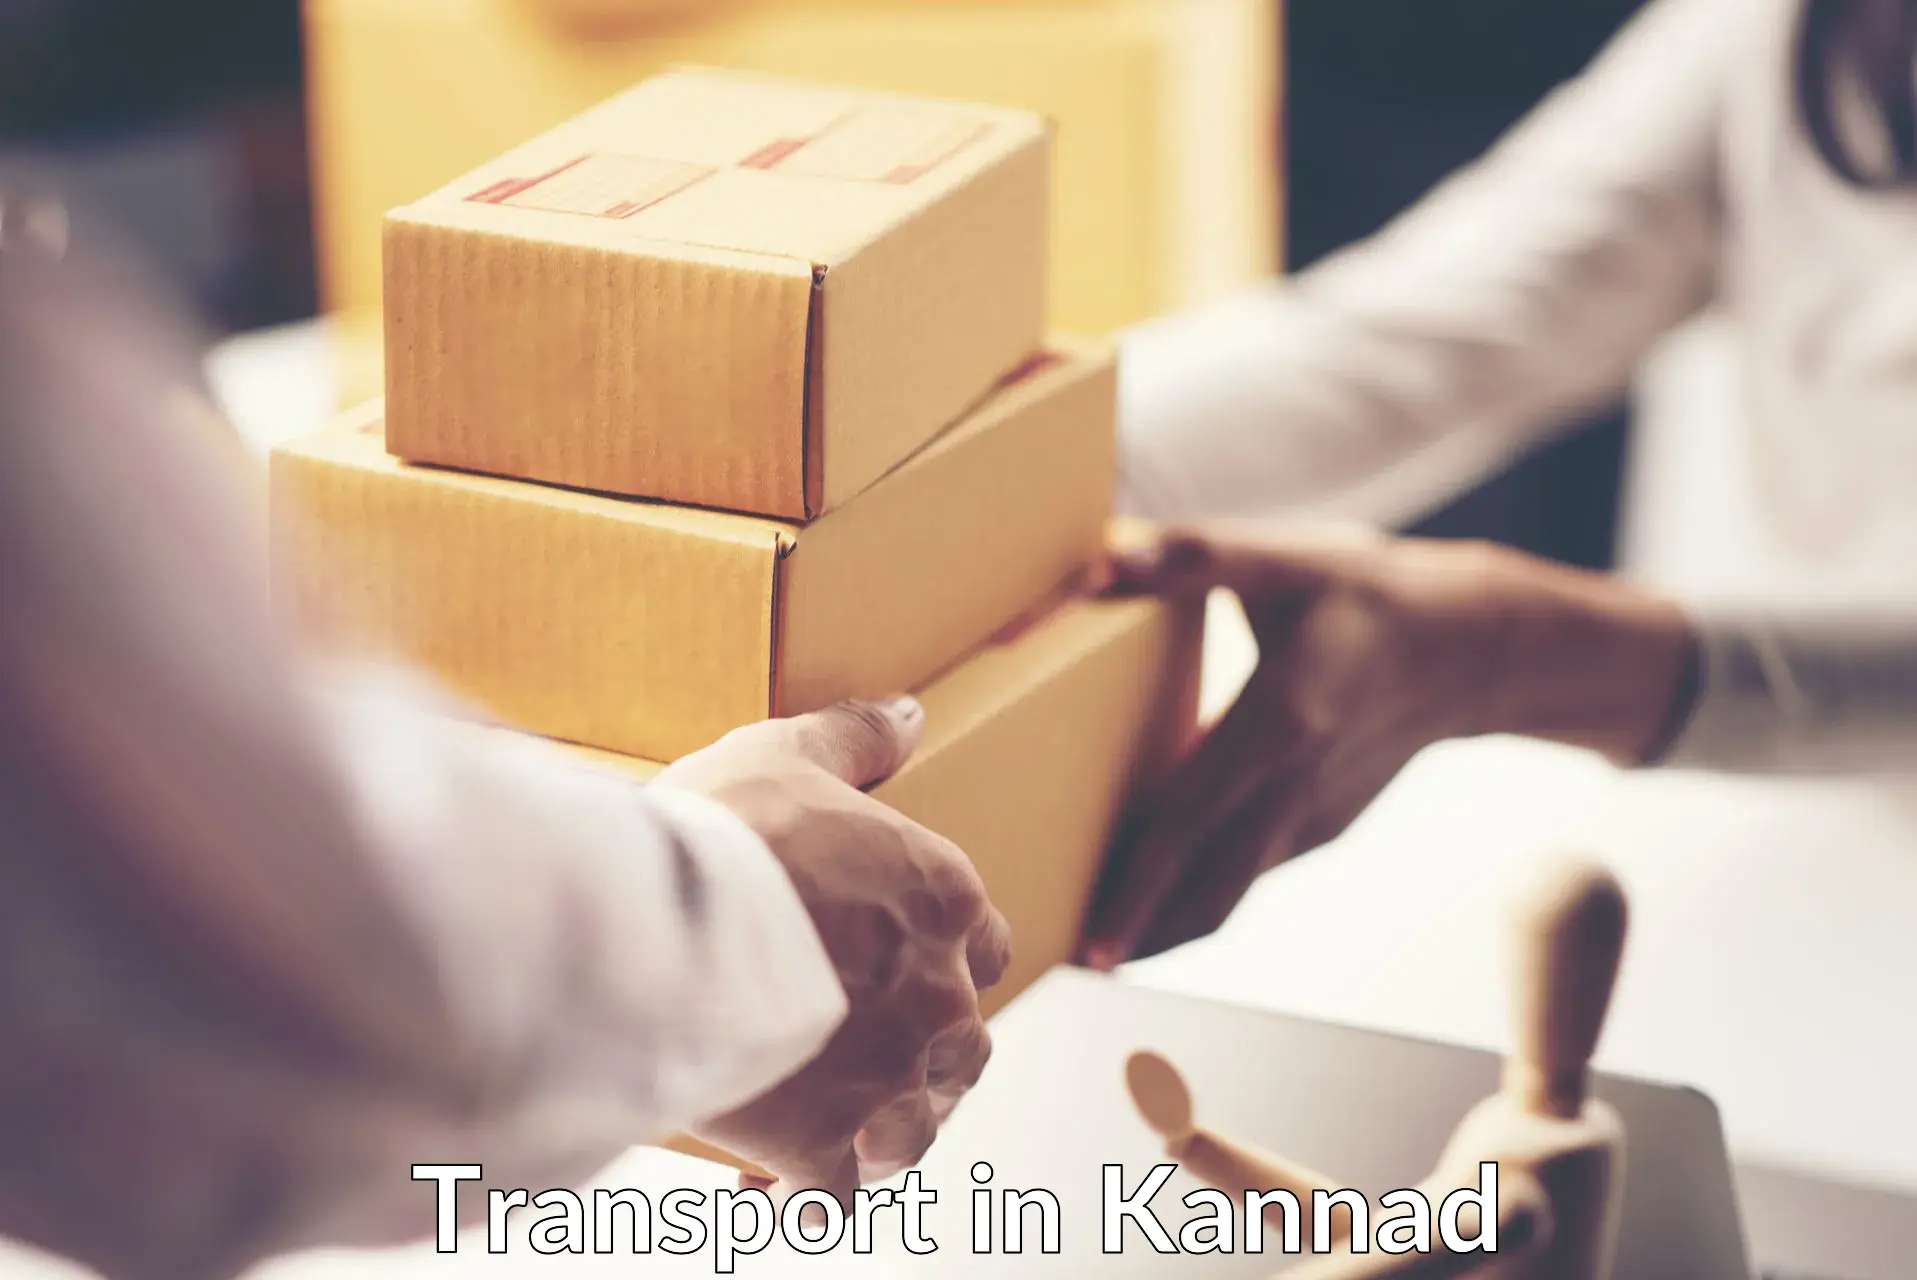 Transport shared services in Kannad